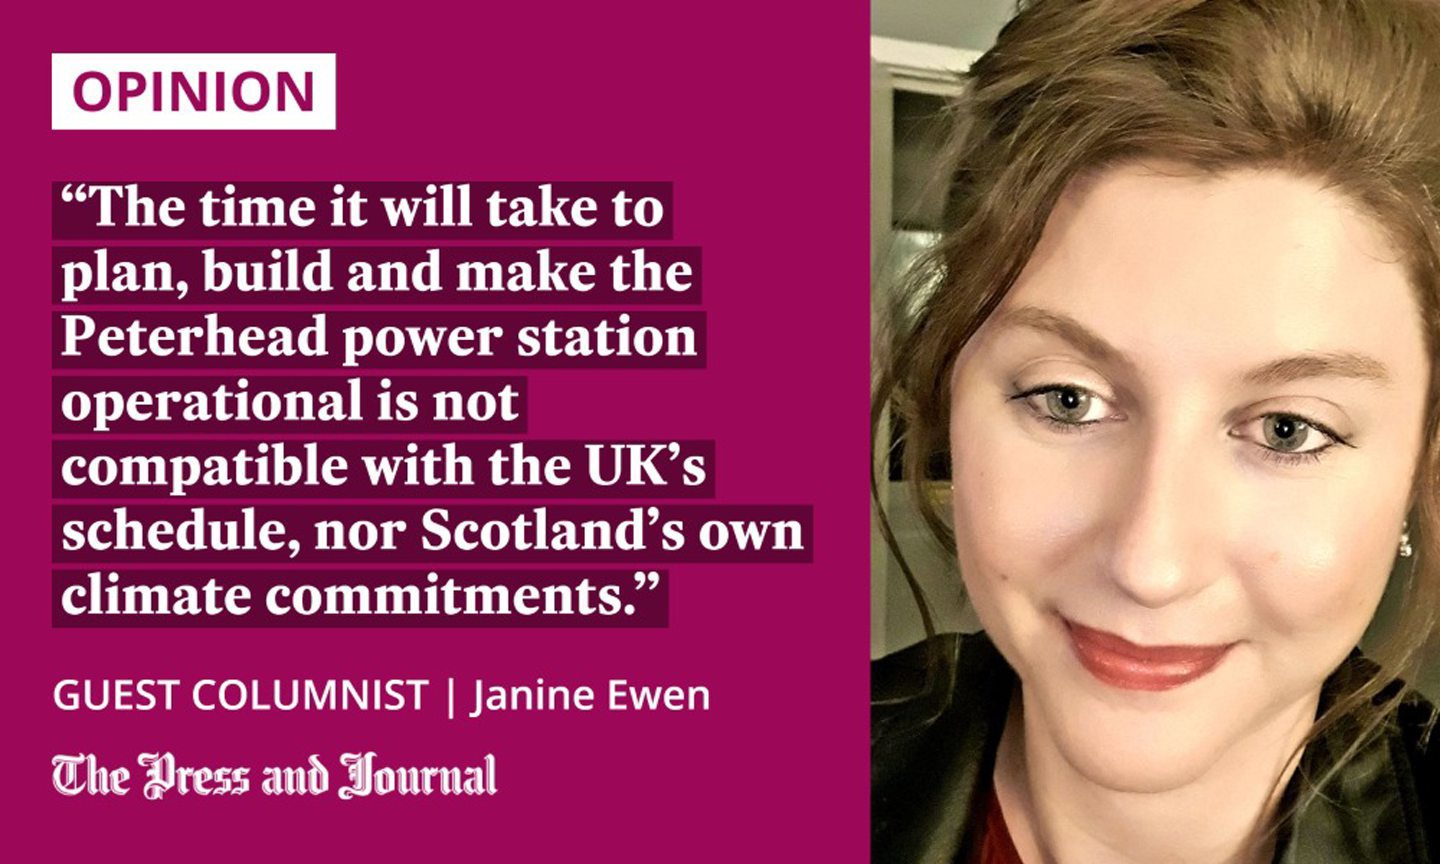 Guest columnist, Janine Ewen, speaks about the Peterhead power station: "the time it will take to plan, build and make the power station operational is not compatible with the above UK schedule, nor Scotland’s own climate commitments."